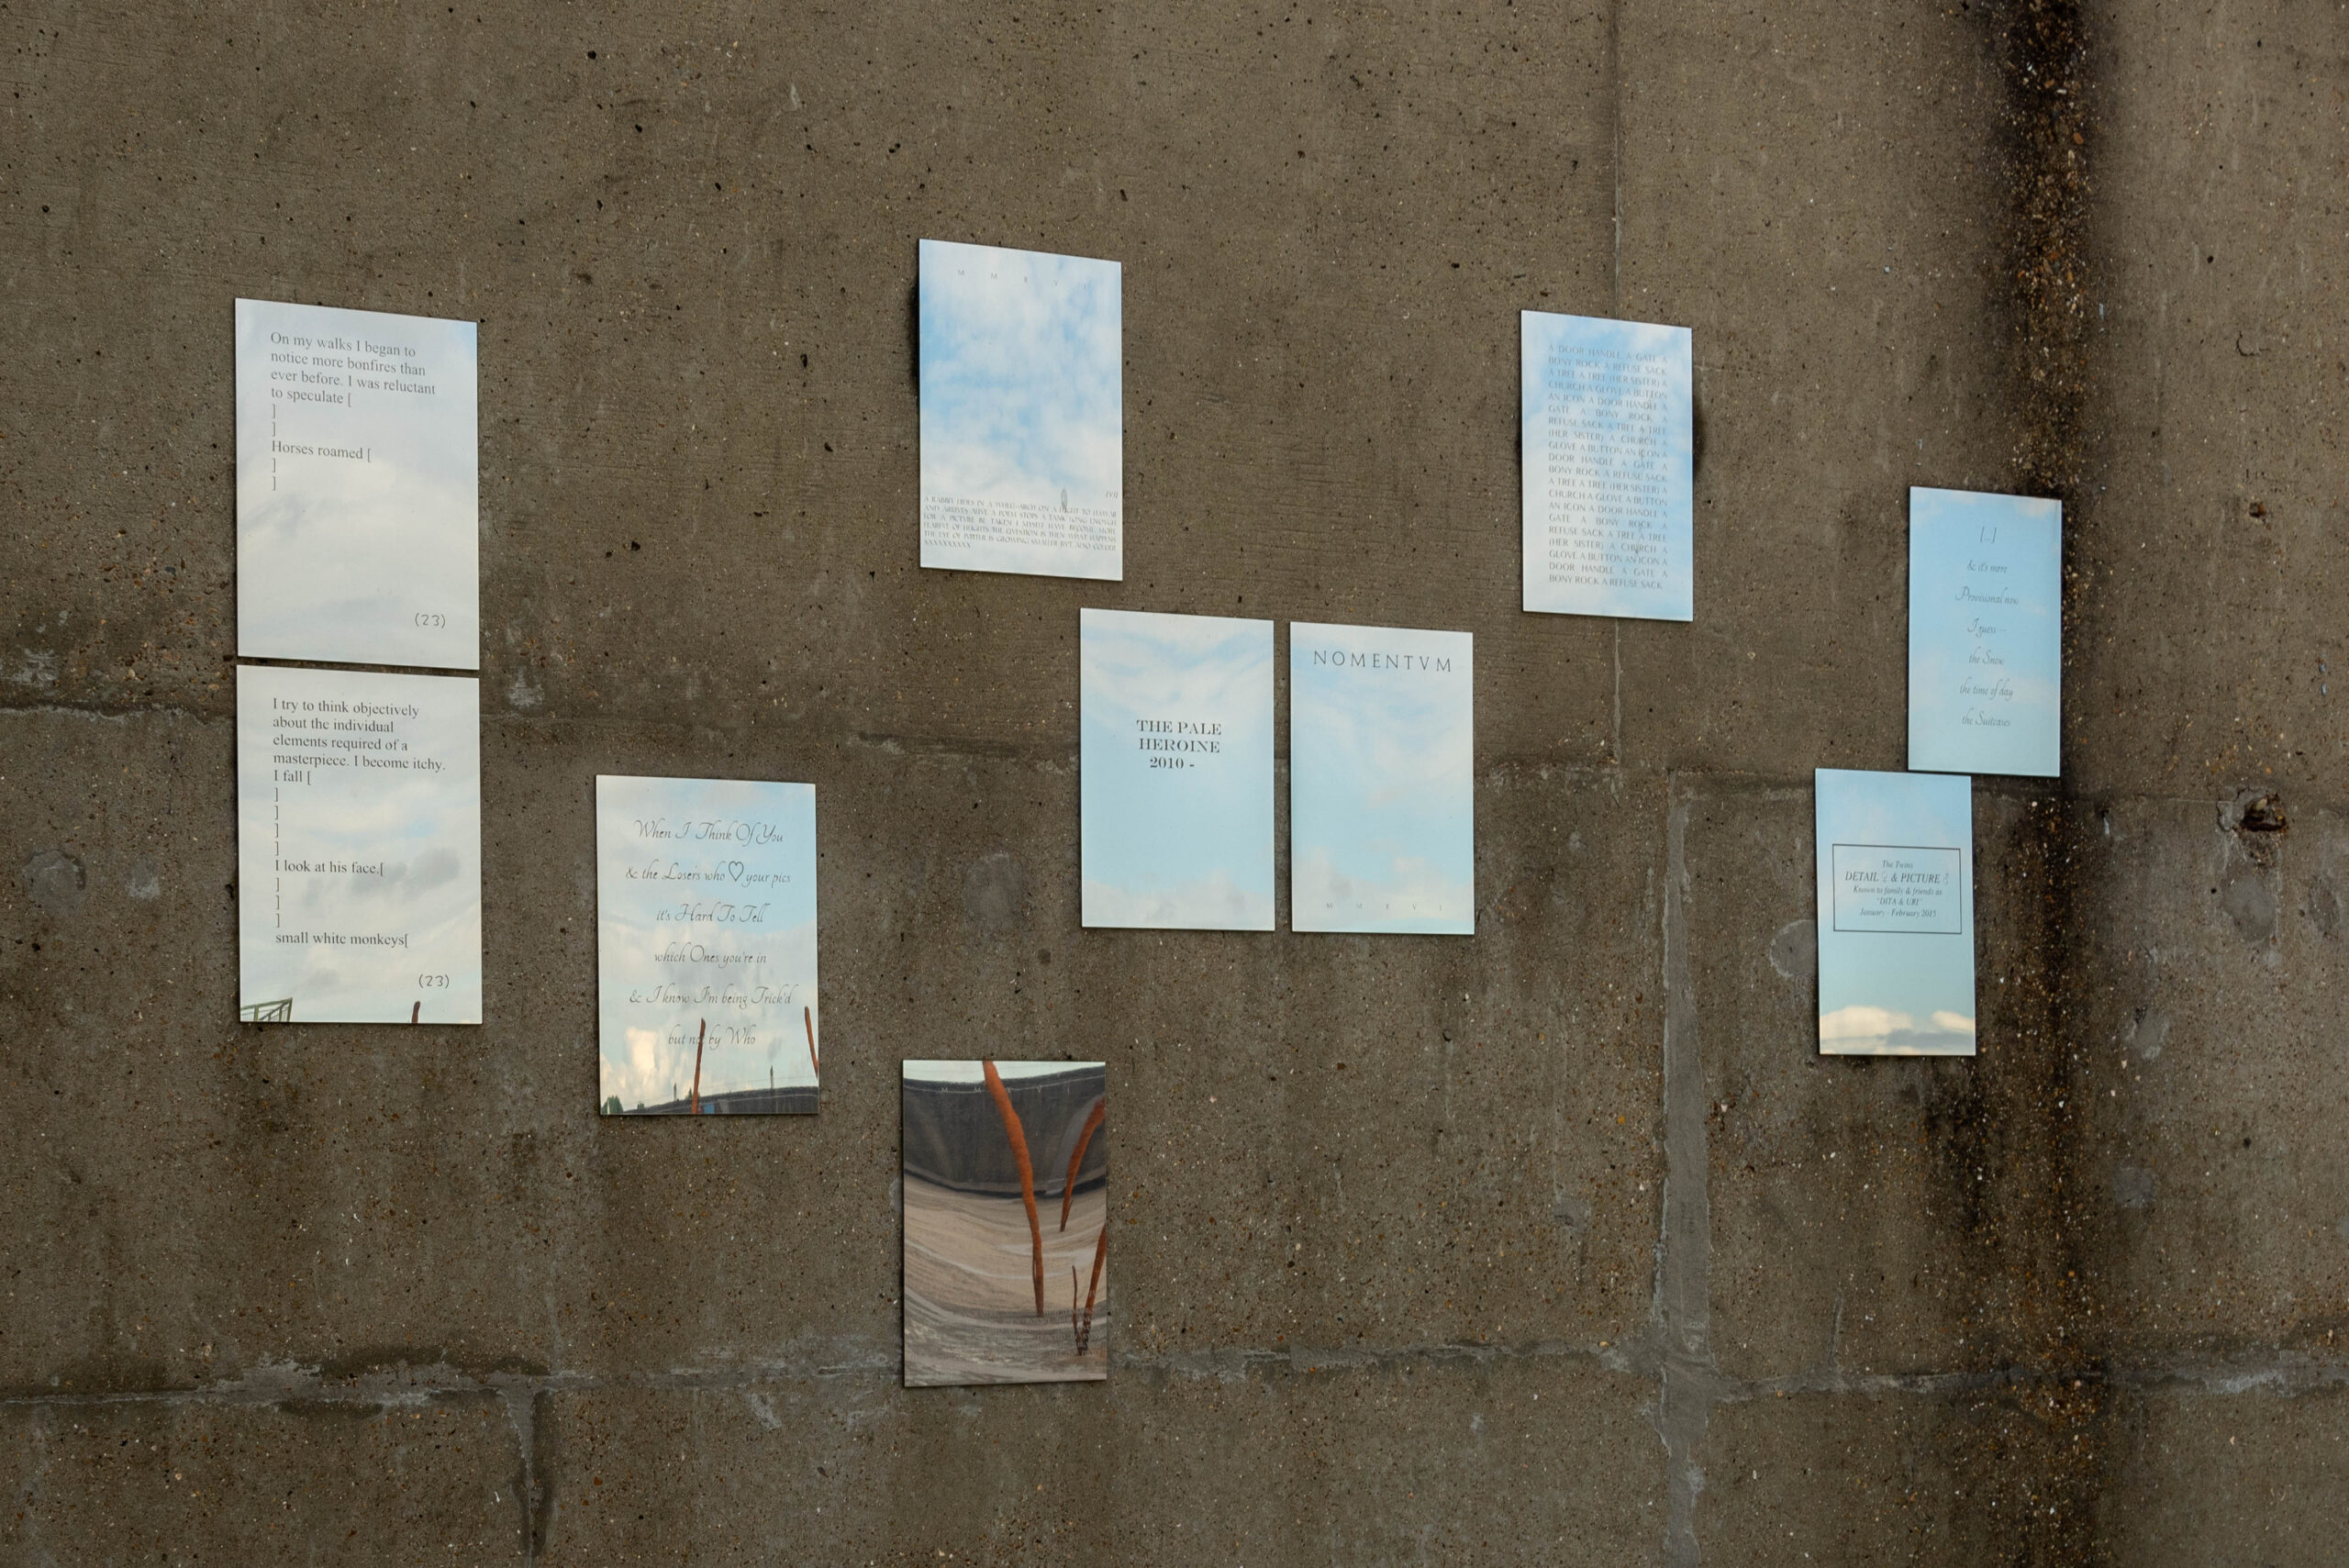 ID: a series of 10 mirror panels mounted on a concrete wall. They are each engraved with fragments of poetry in a variety of typefaces and formats.